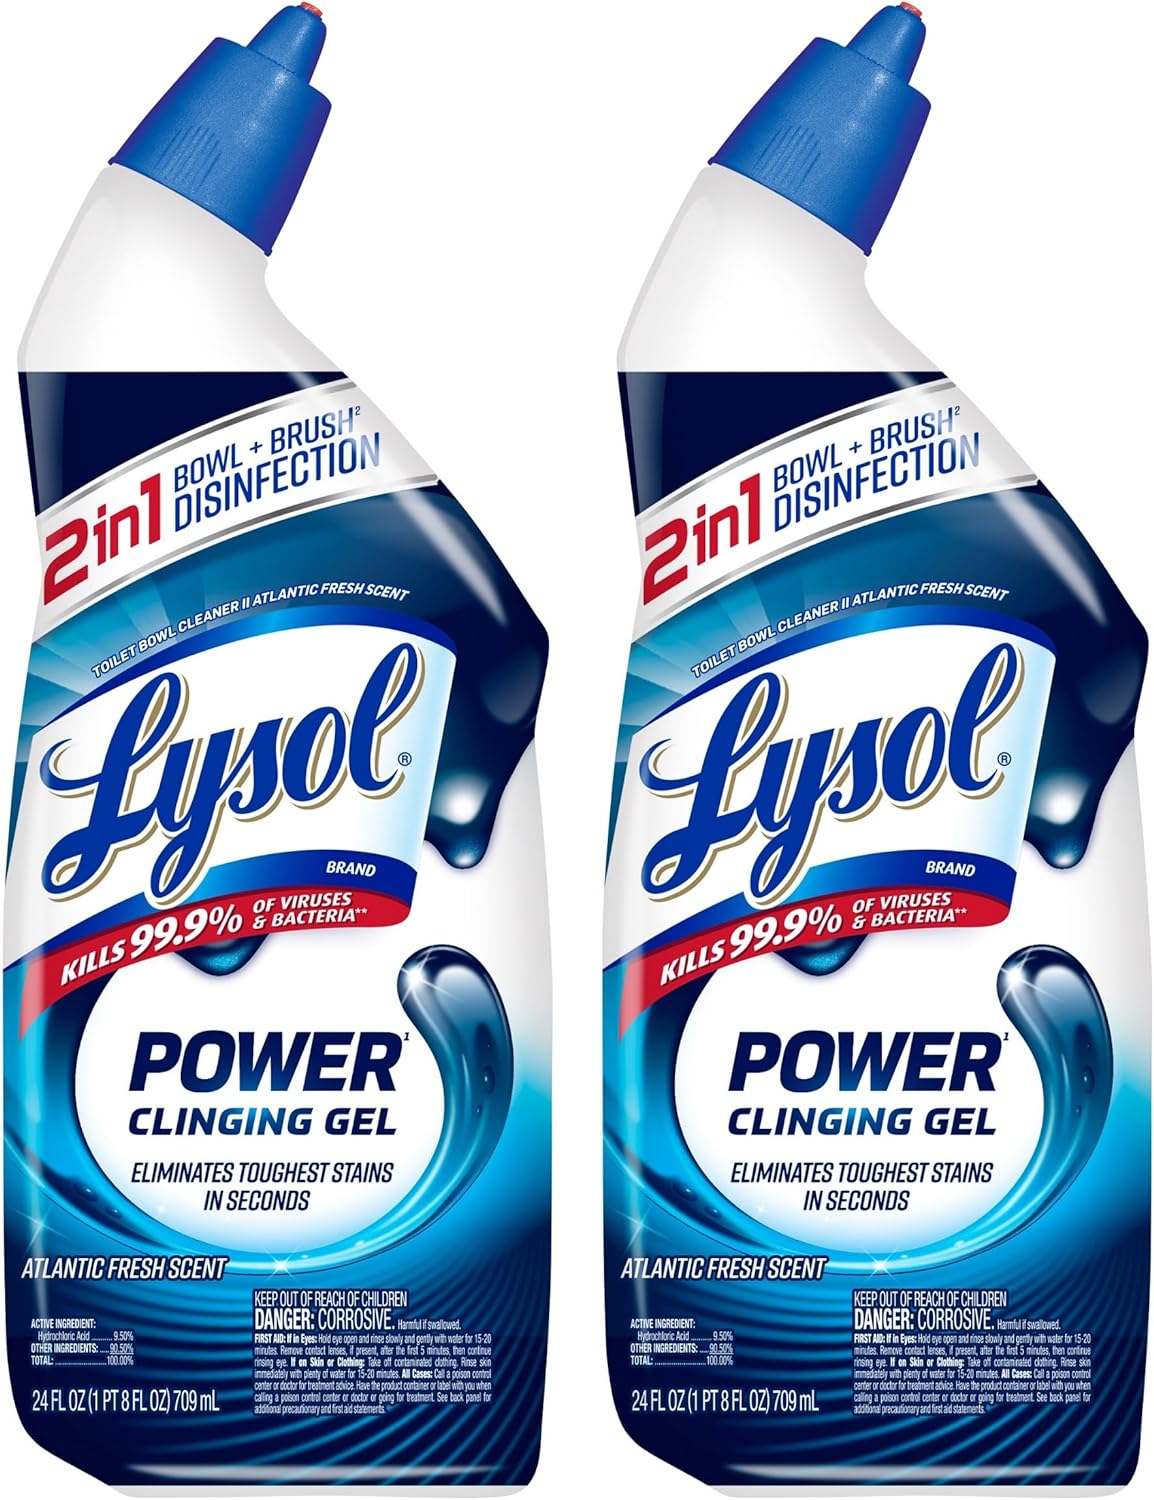 2 pack Lysol Power Toilet Bowl Cleaner Gel, For Cleaning and Disinfecting, Stain Removal, 24 Fl oz, $3.44 with Subscribe and Save, Amazon $3.44